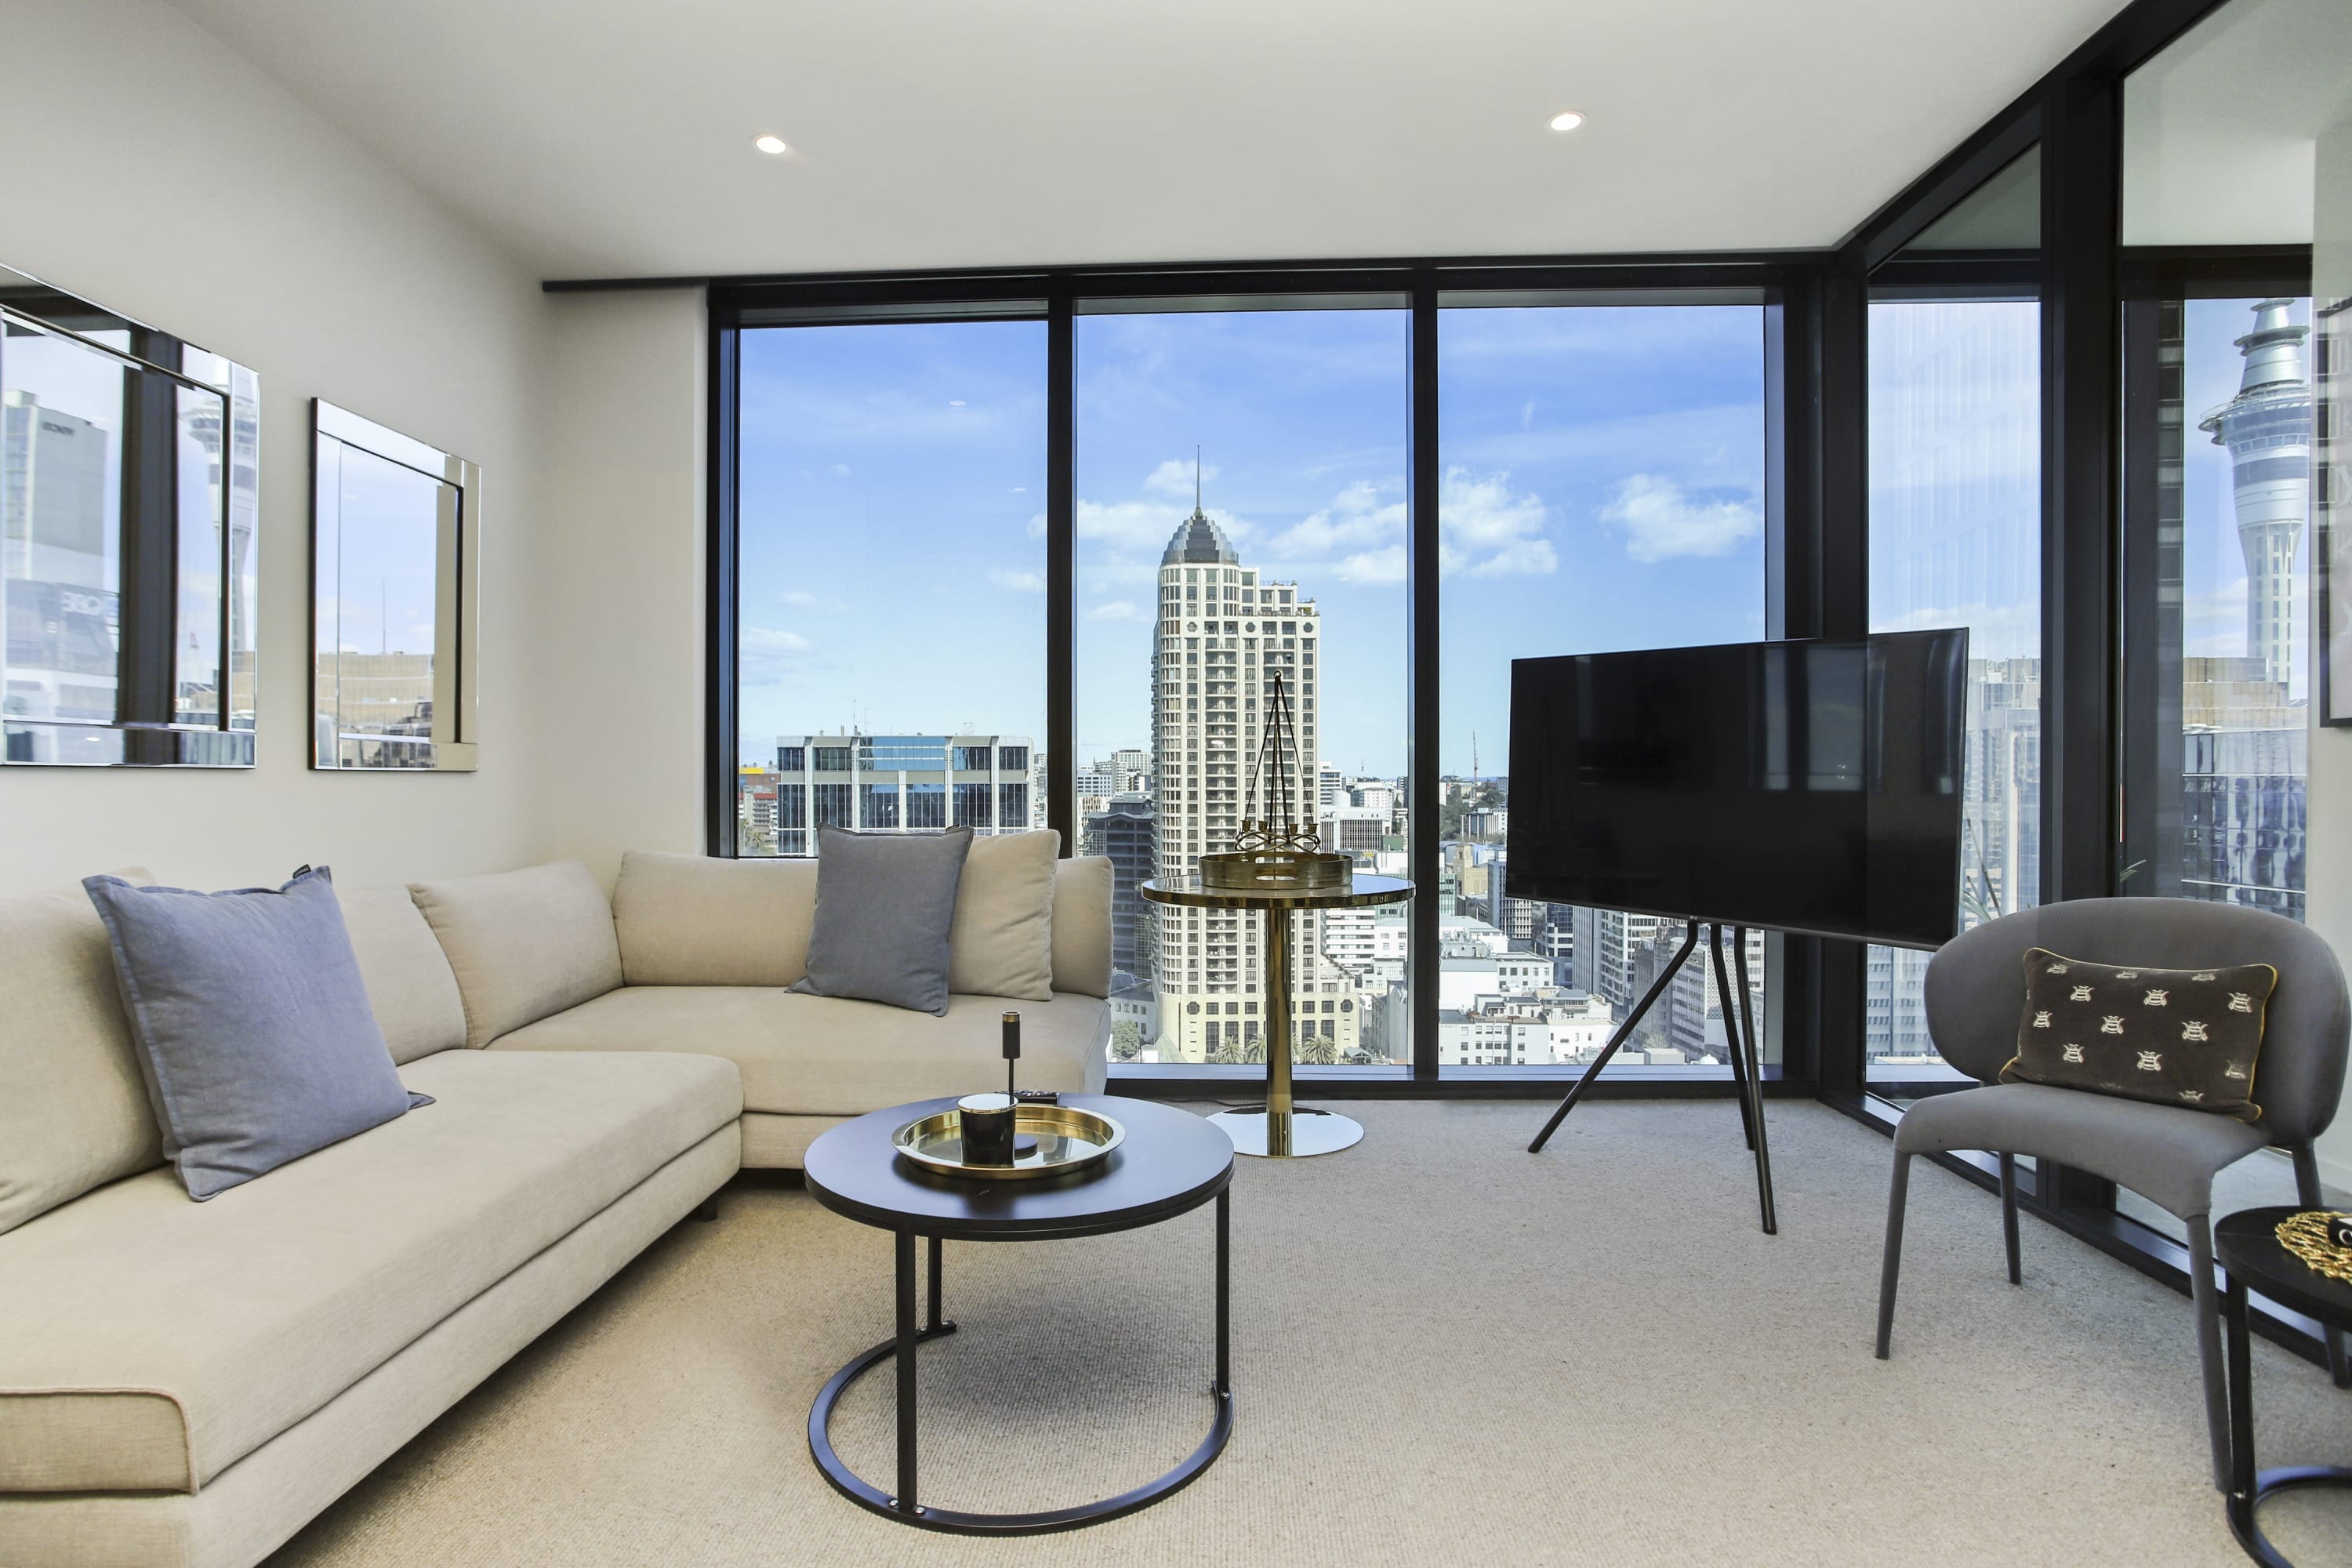 Property Image 2 - Stunning City Views in Elegant Auckland Apartment 